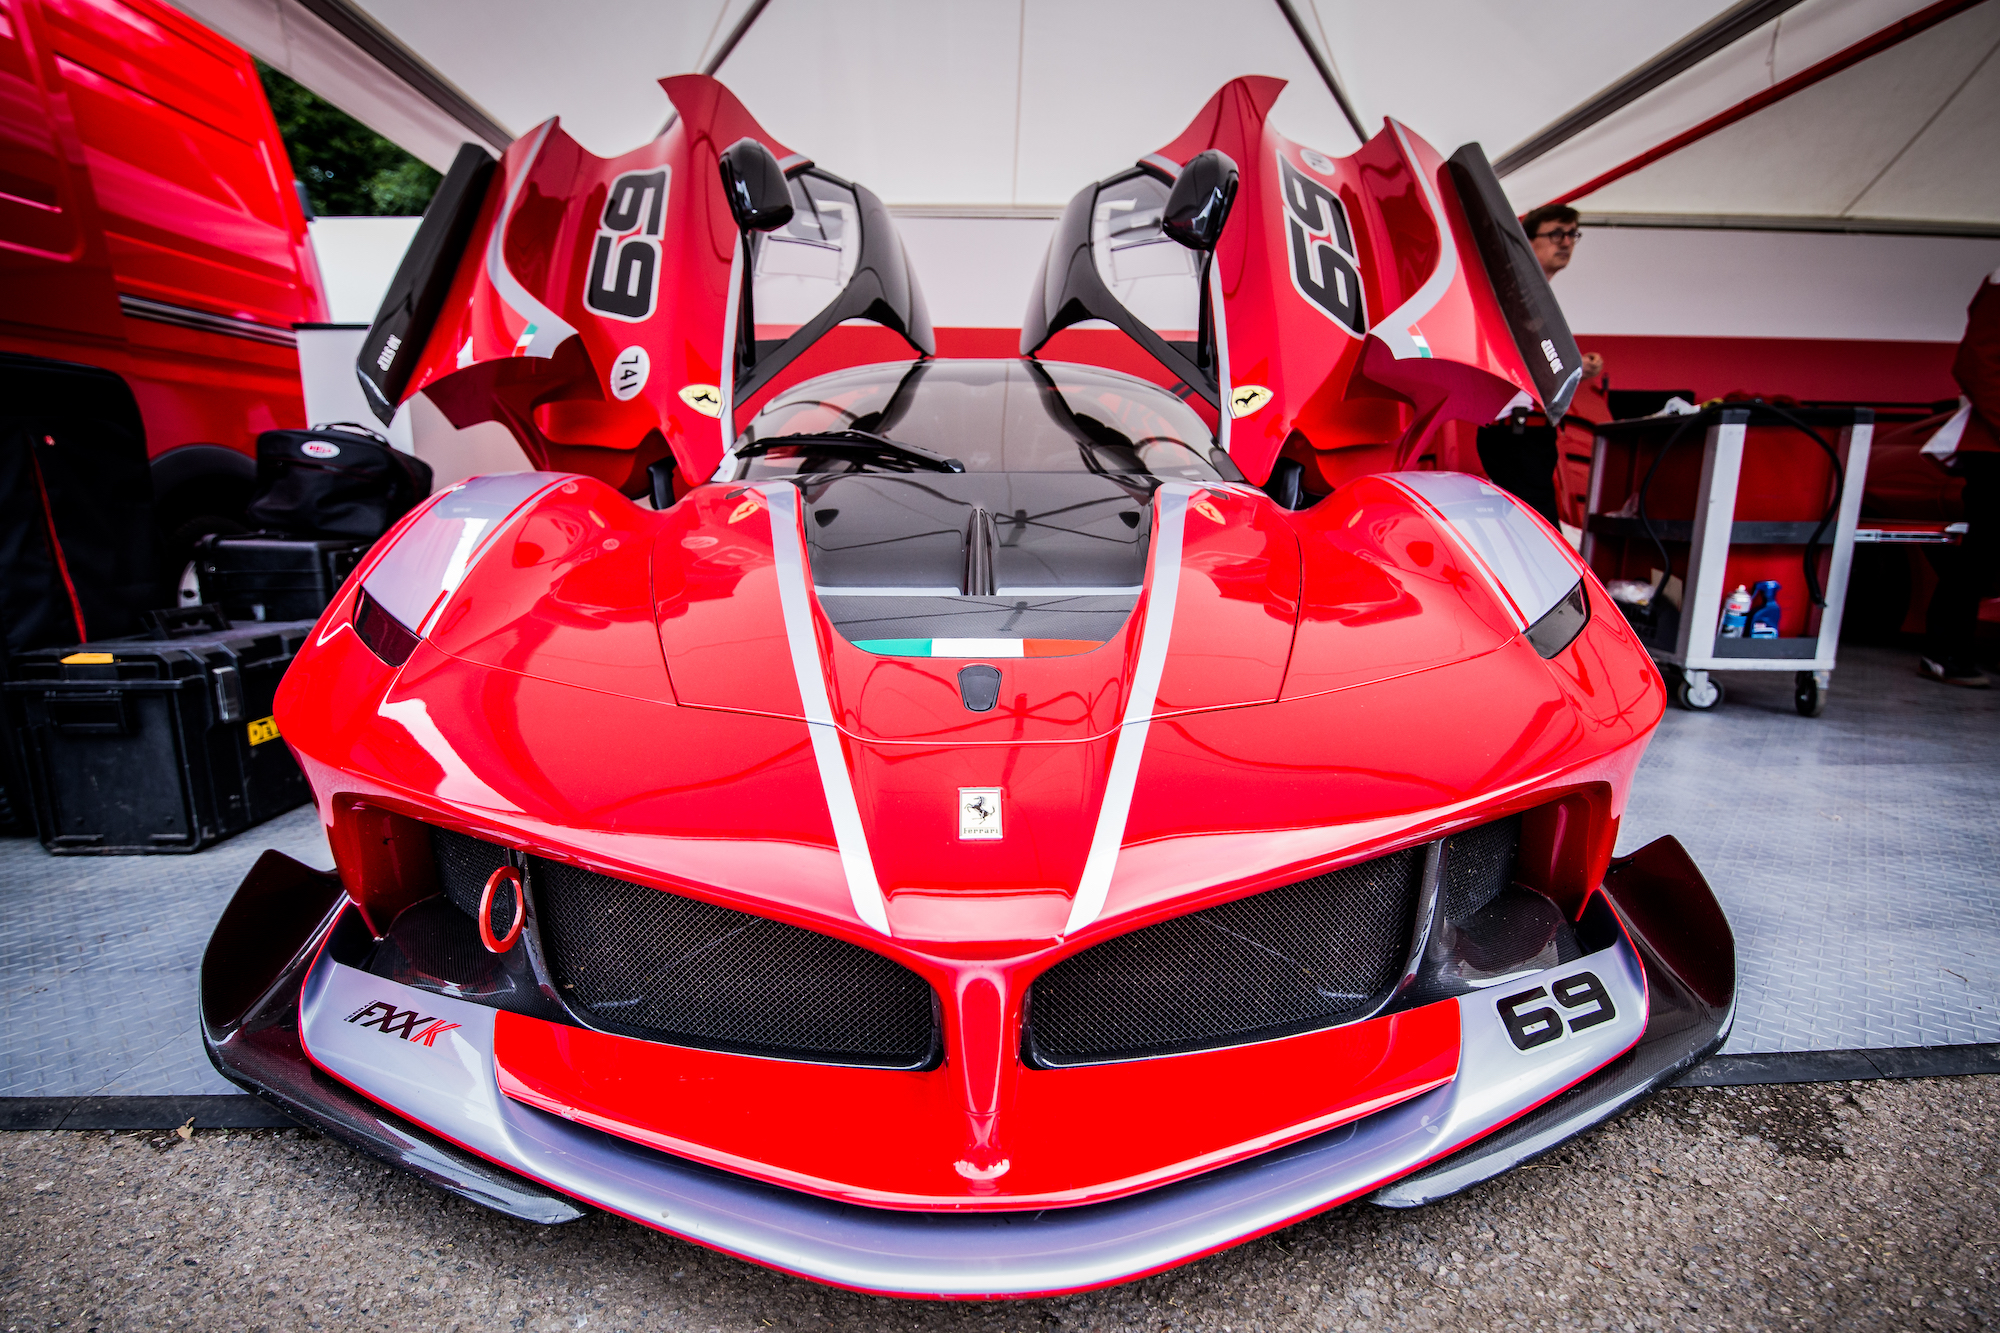 A red Ferrari FXX-K, one of the top 5 most expensive Ferraris, sits in the paddock awaiting its driver and passenger to tackle the Goodwood Hillclimb in June 2016